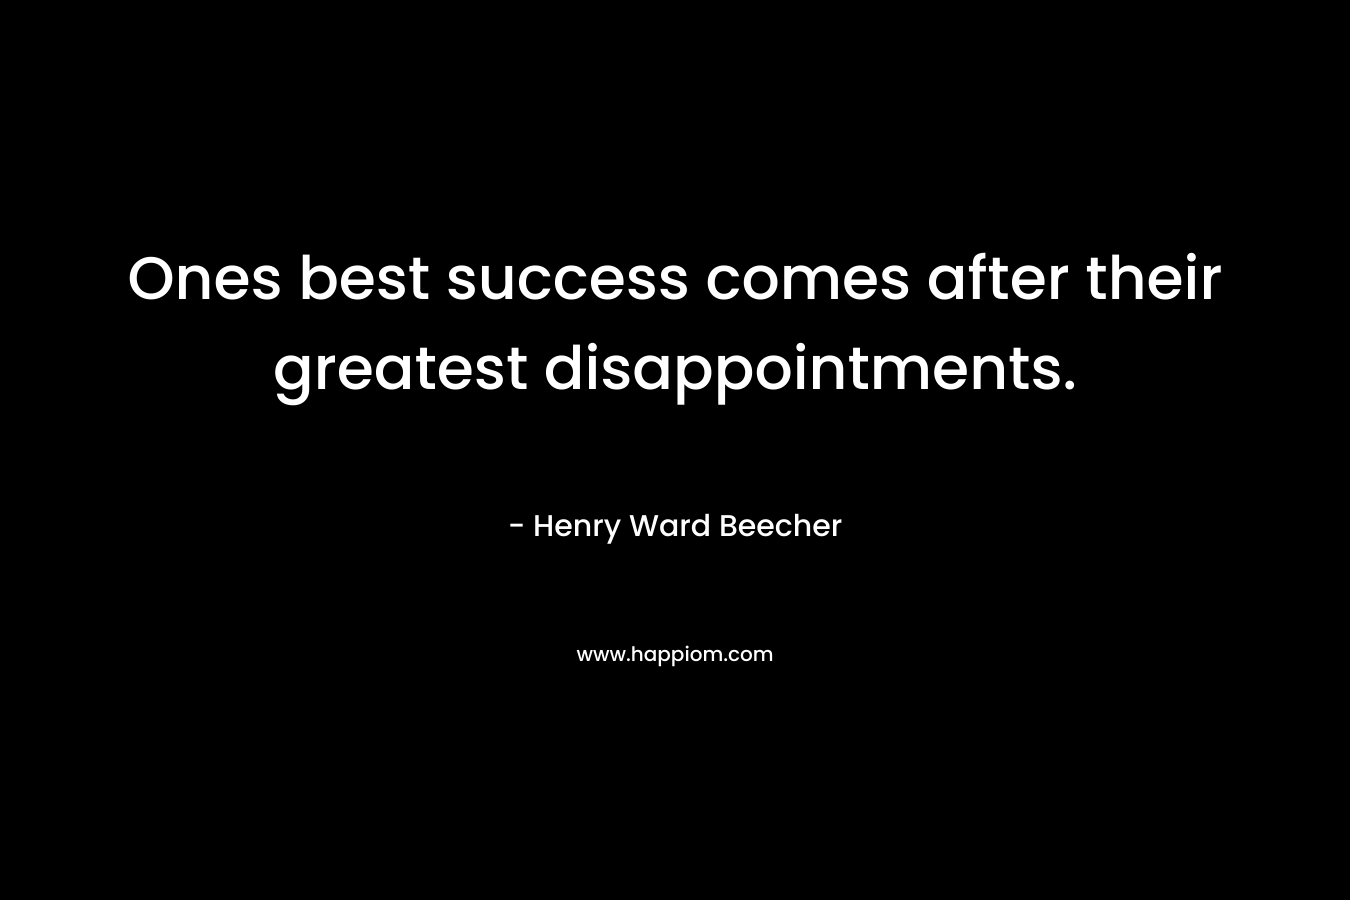 Ones best success comes after their greatest disappointments. – Henry Ward Beecher